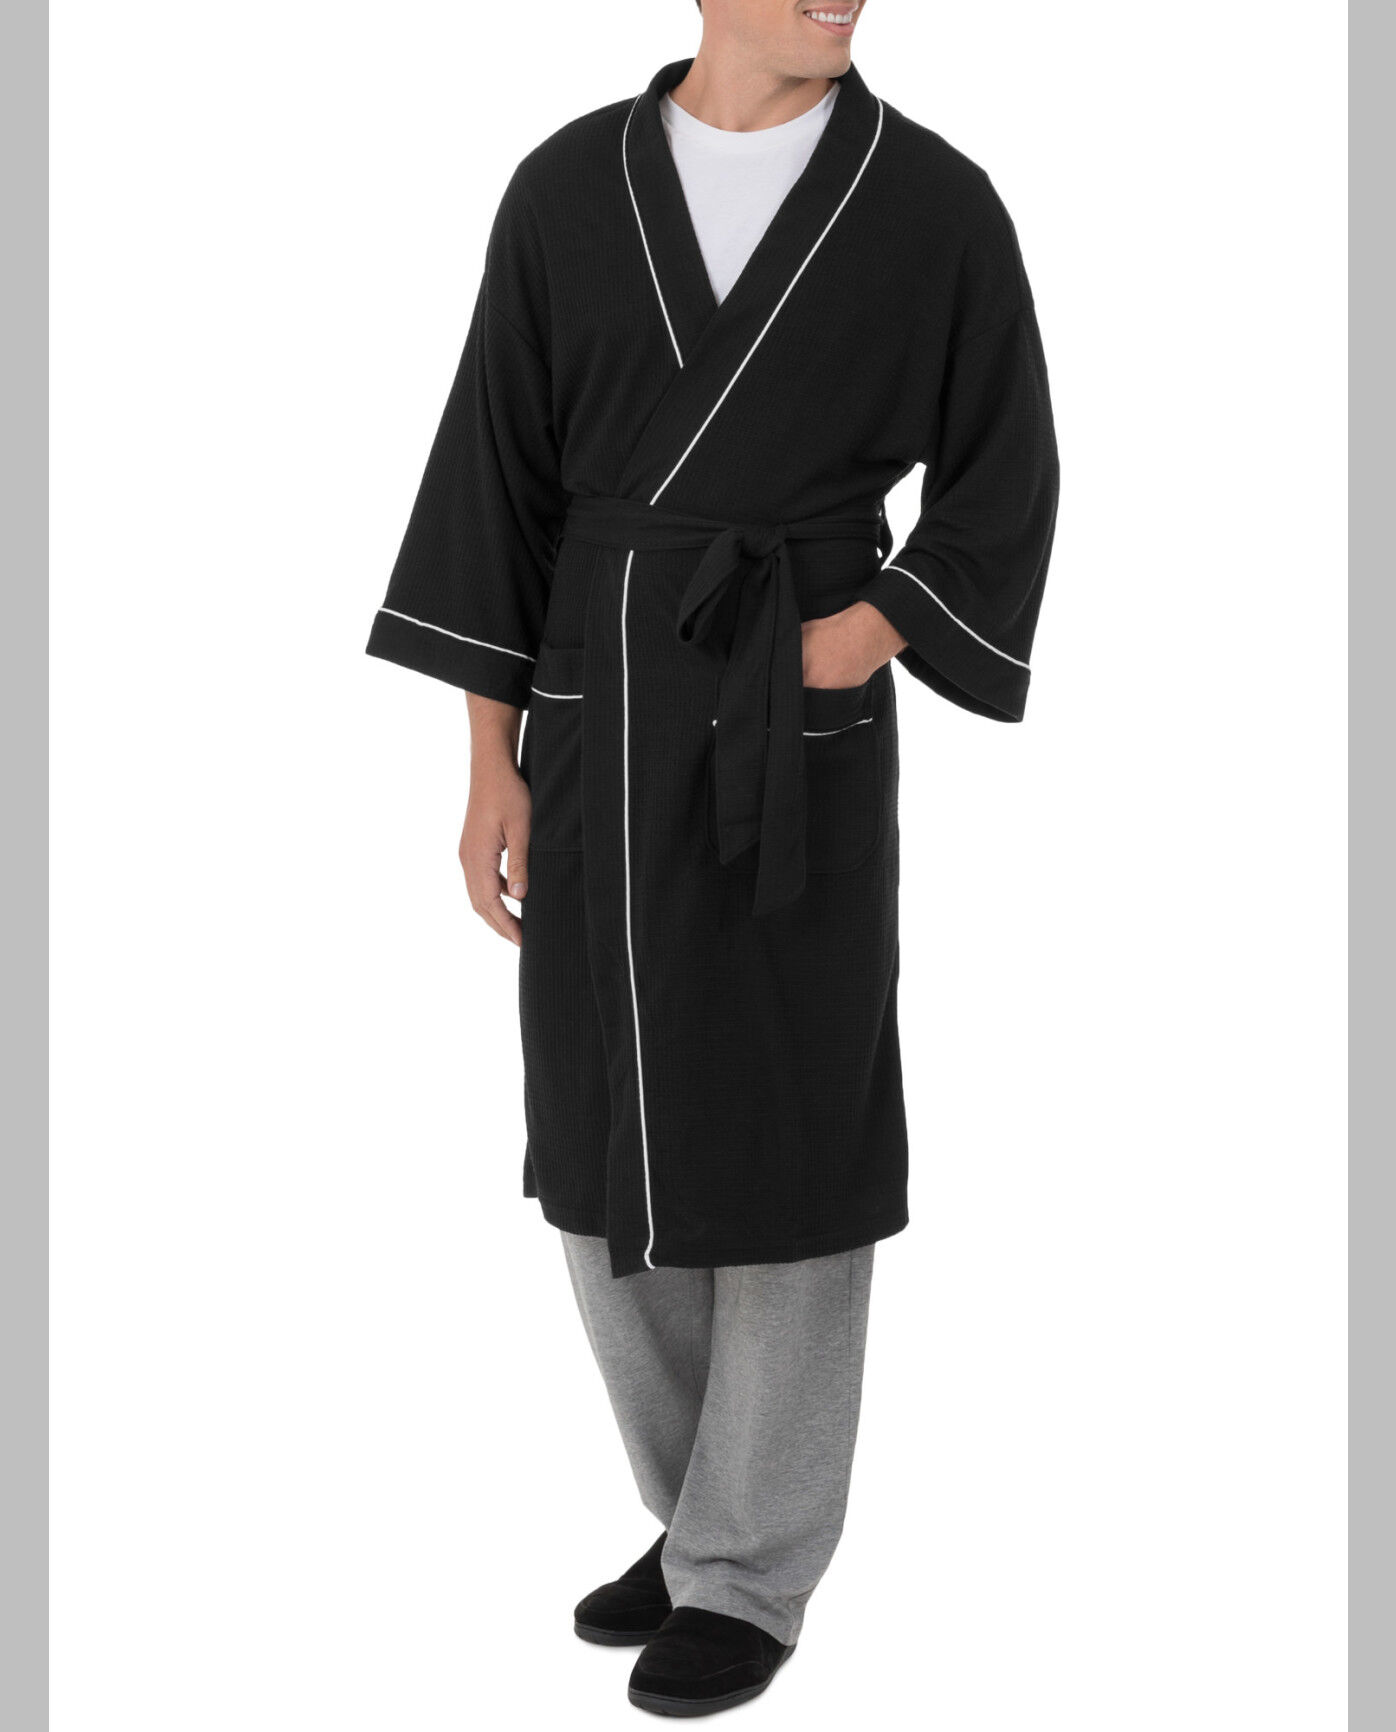 Men's Soft Touch Waffle Robe, 1 Pack, Size 2XL BLACK